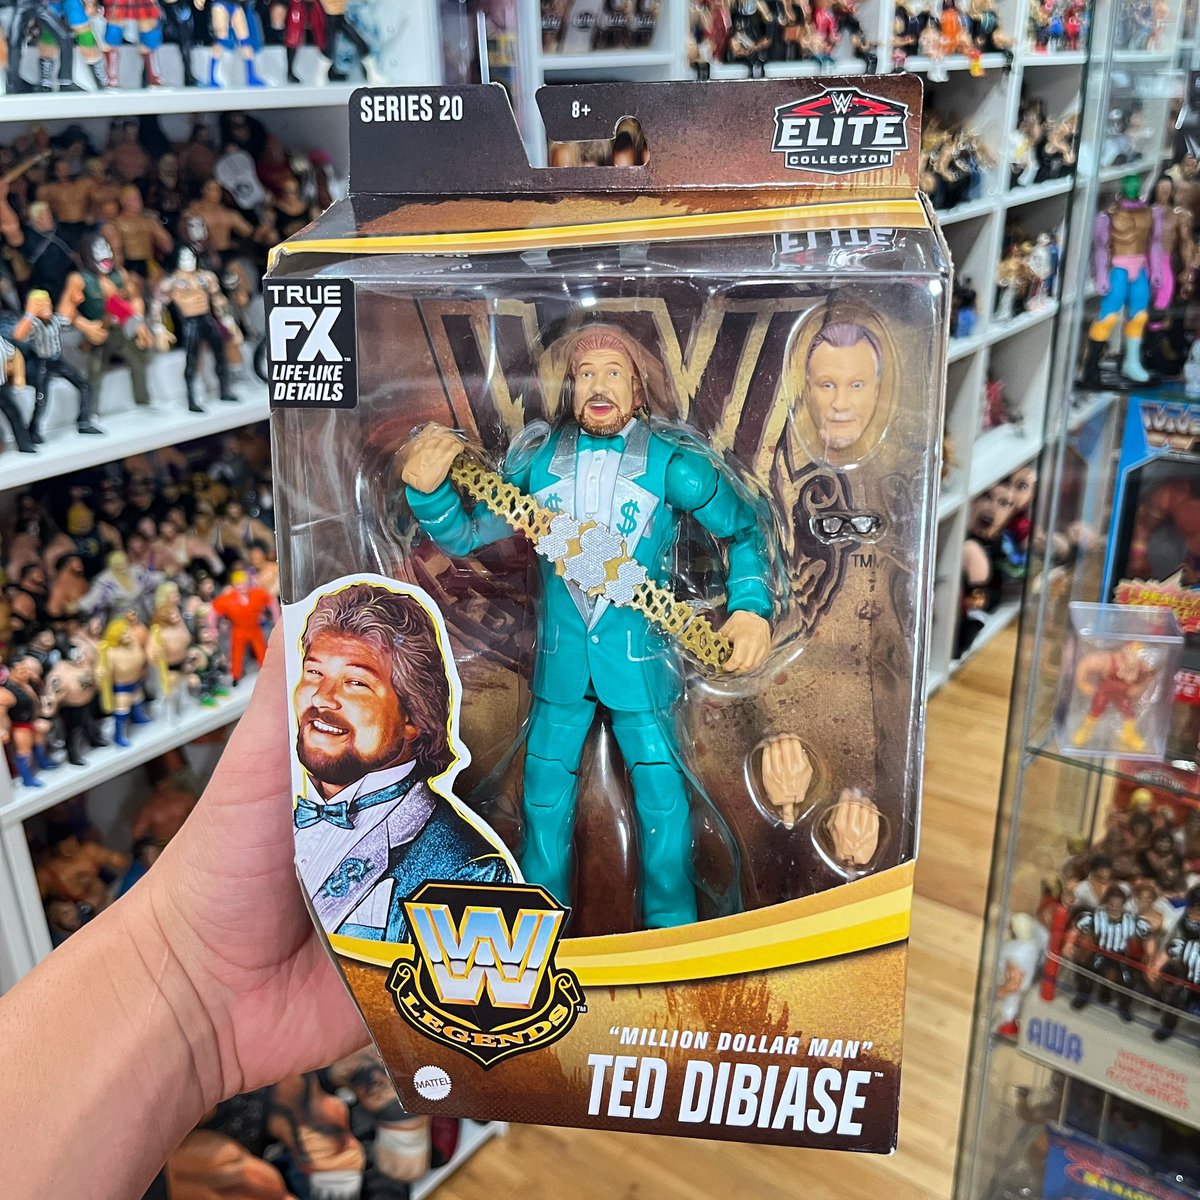 I’m a sucker for green suit Uncle Ted figures & this is probably my second favorite from Legends 20.

Join Whatnot @ WHATHEEL.com & get $15 to use!

#figheel #wwe #wwf #aew #wrestlingfigures #actionfigures #toycollector #toycrewbuddies #milliondollarman #teddibiase